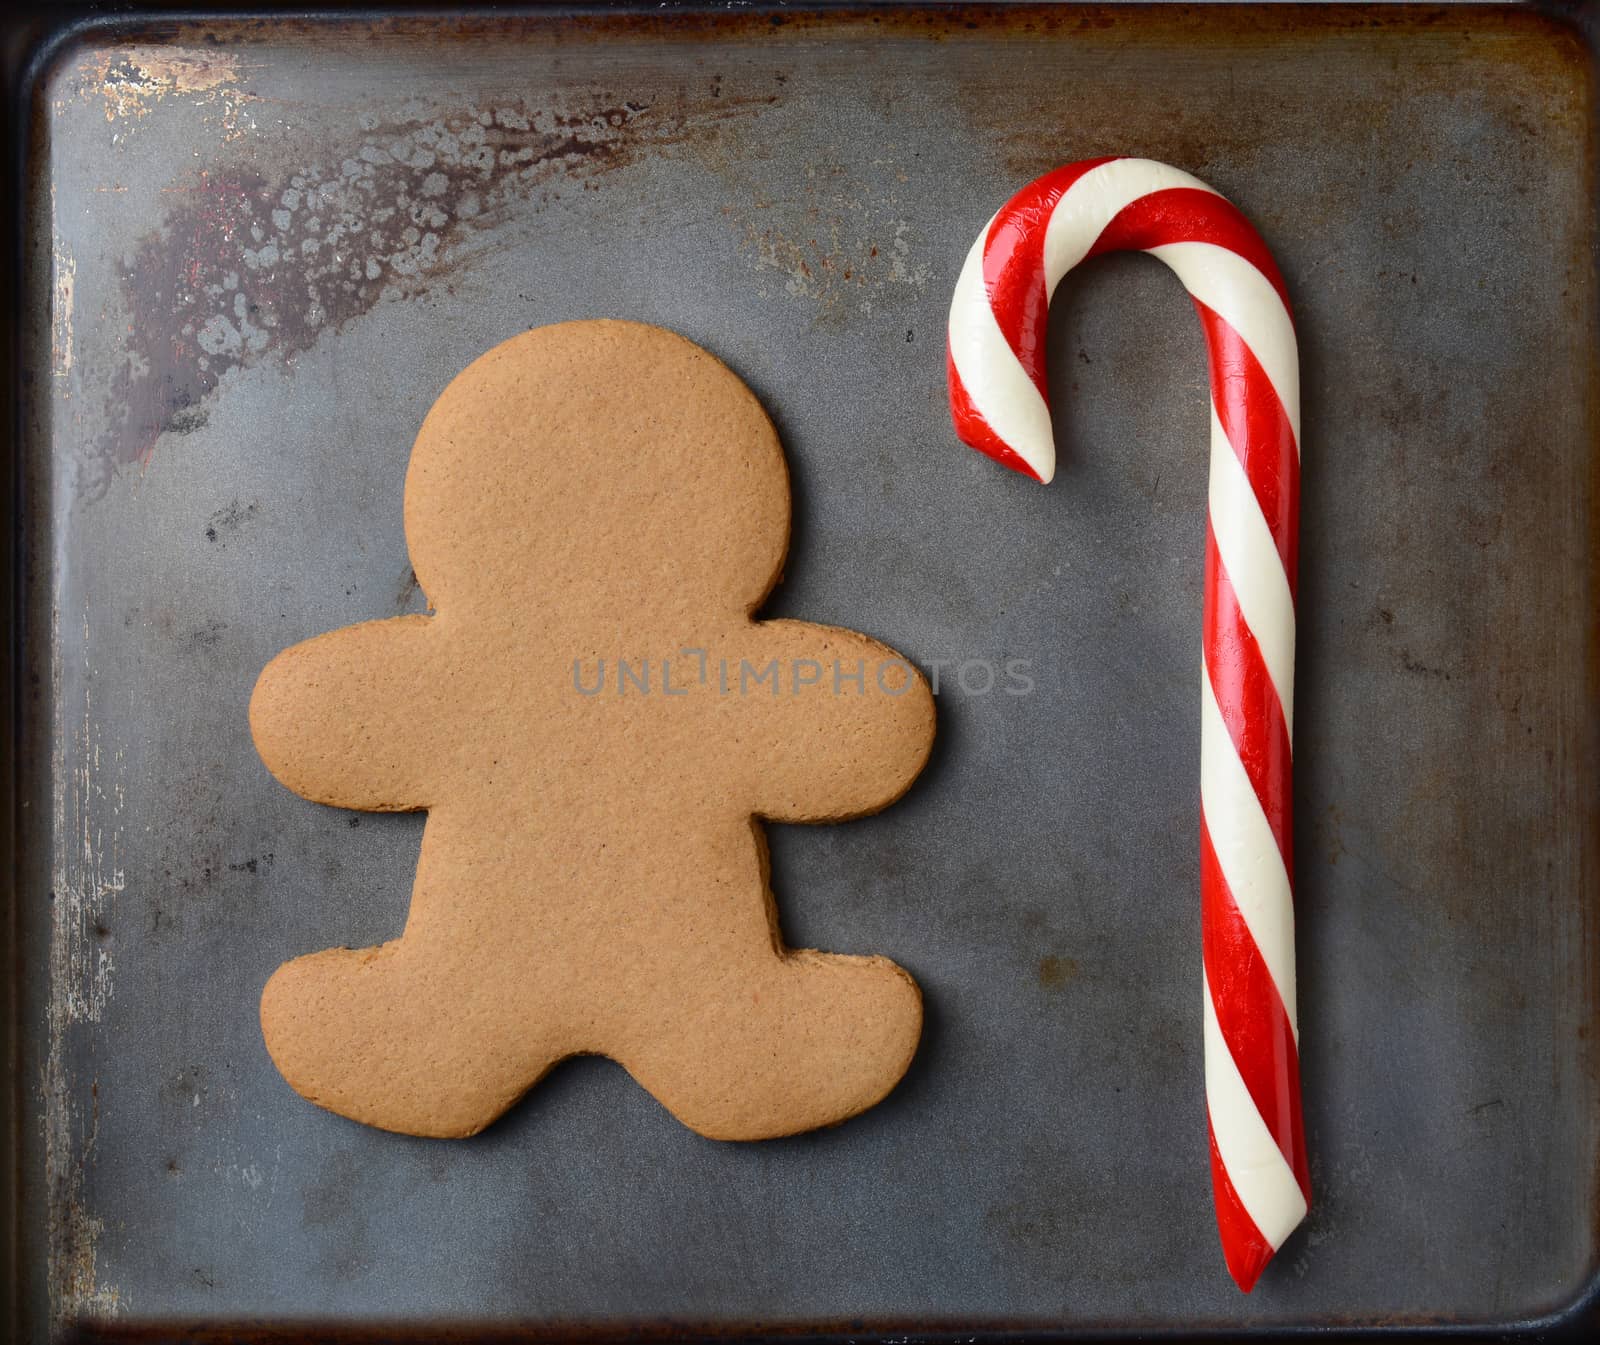 Closeup of an old fashioned candy cane and a gingerbread man on a metal cookie sheet. The cookie is undecorated. Square format.